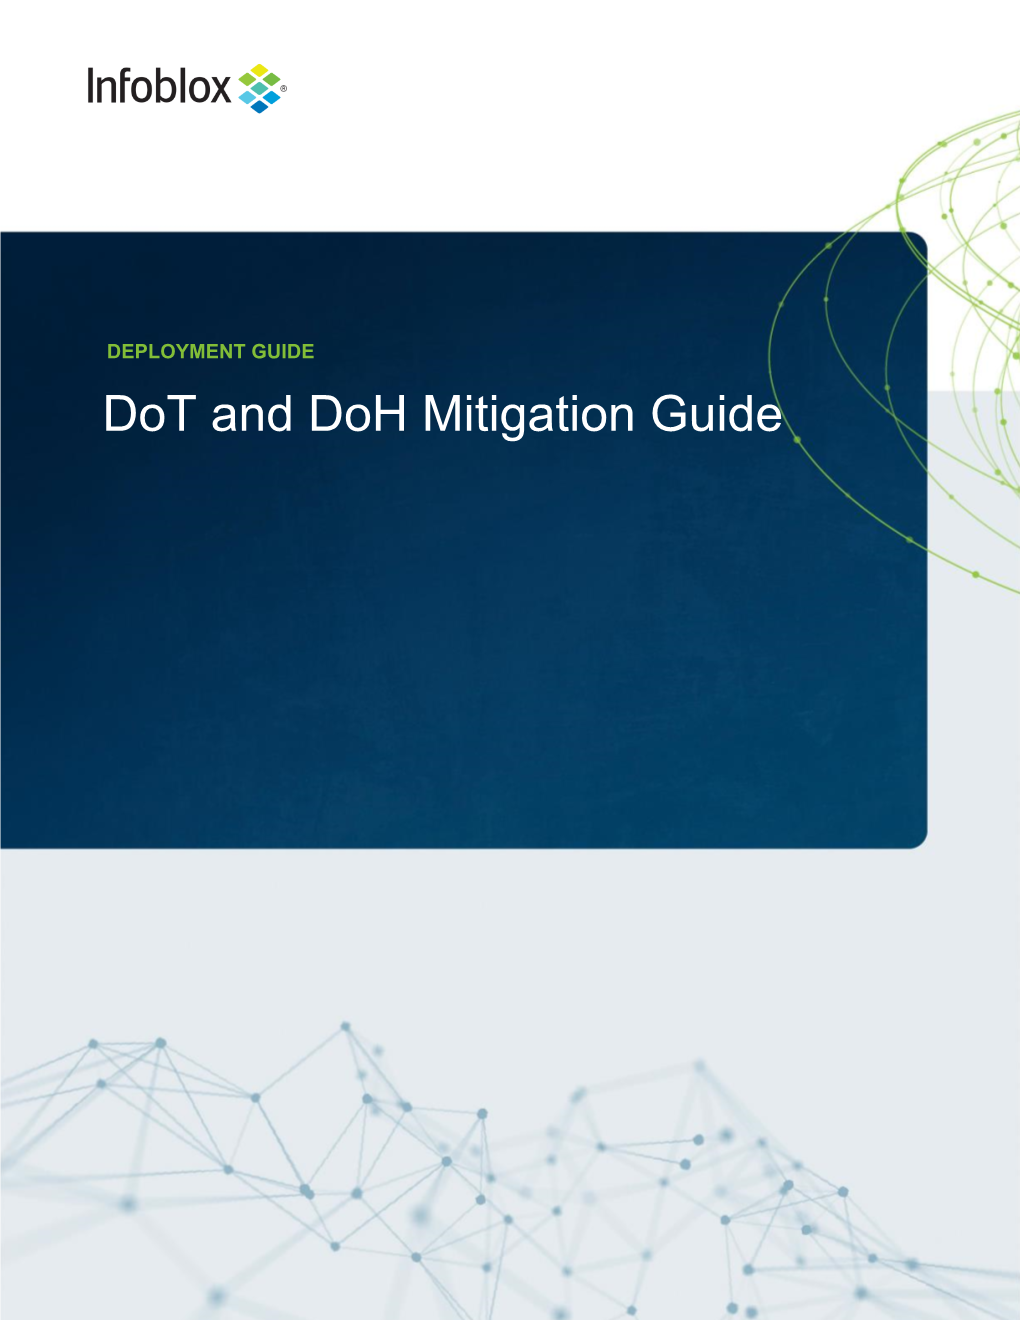 Dot and Doh Mitigation Guide Table of Contents